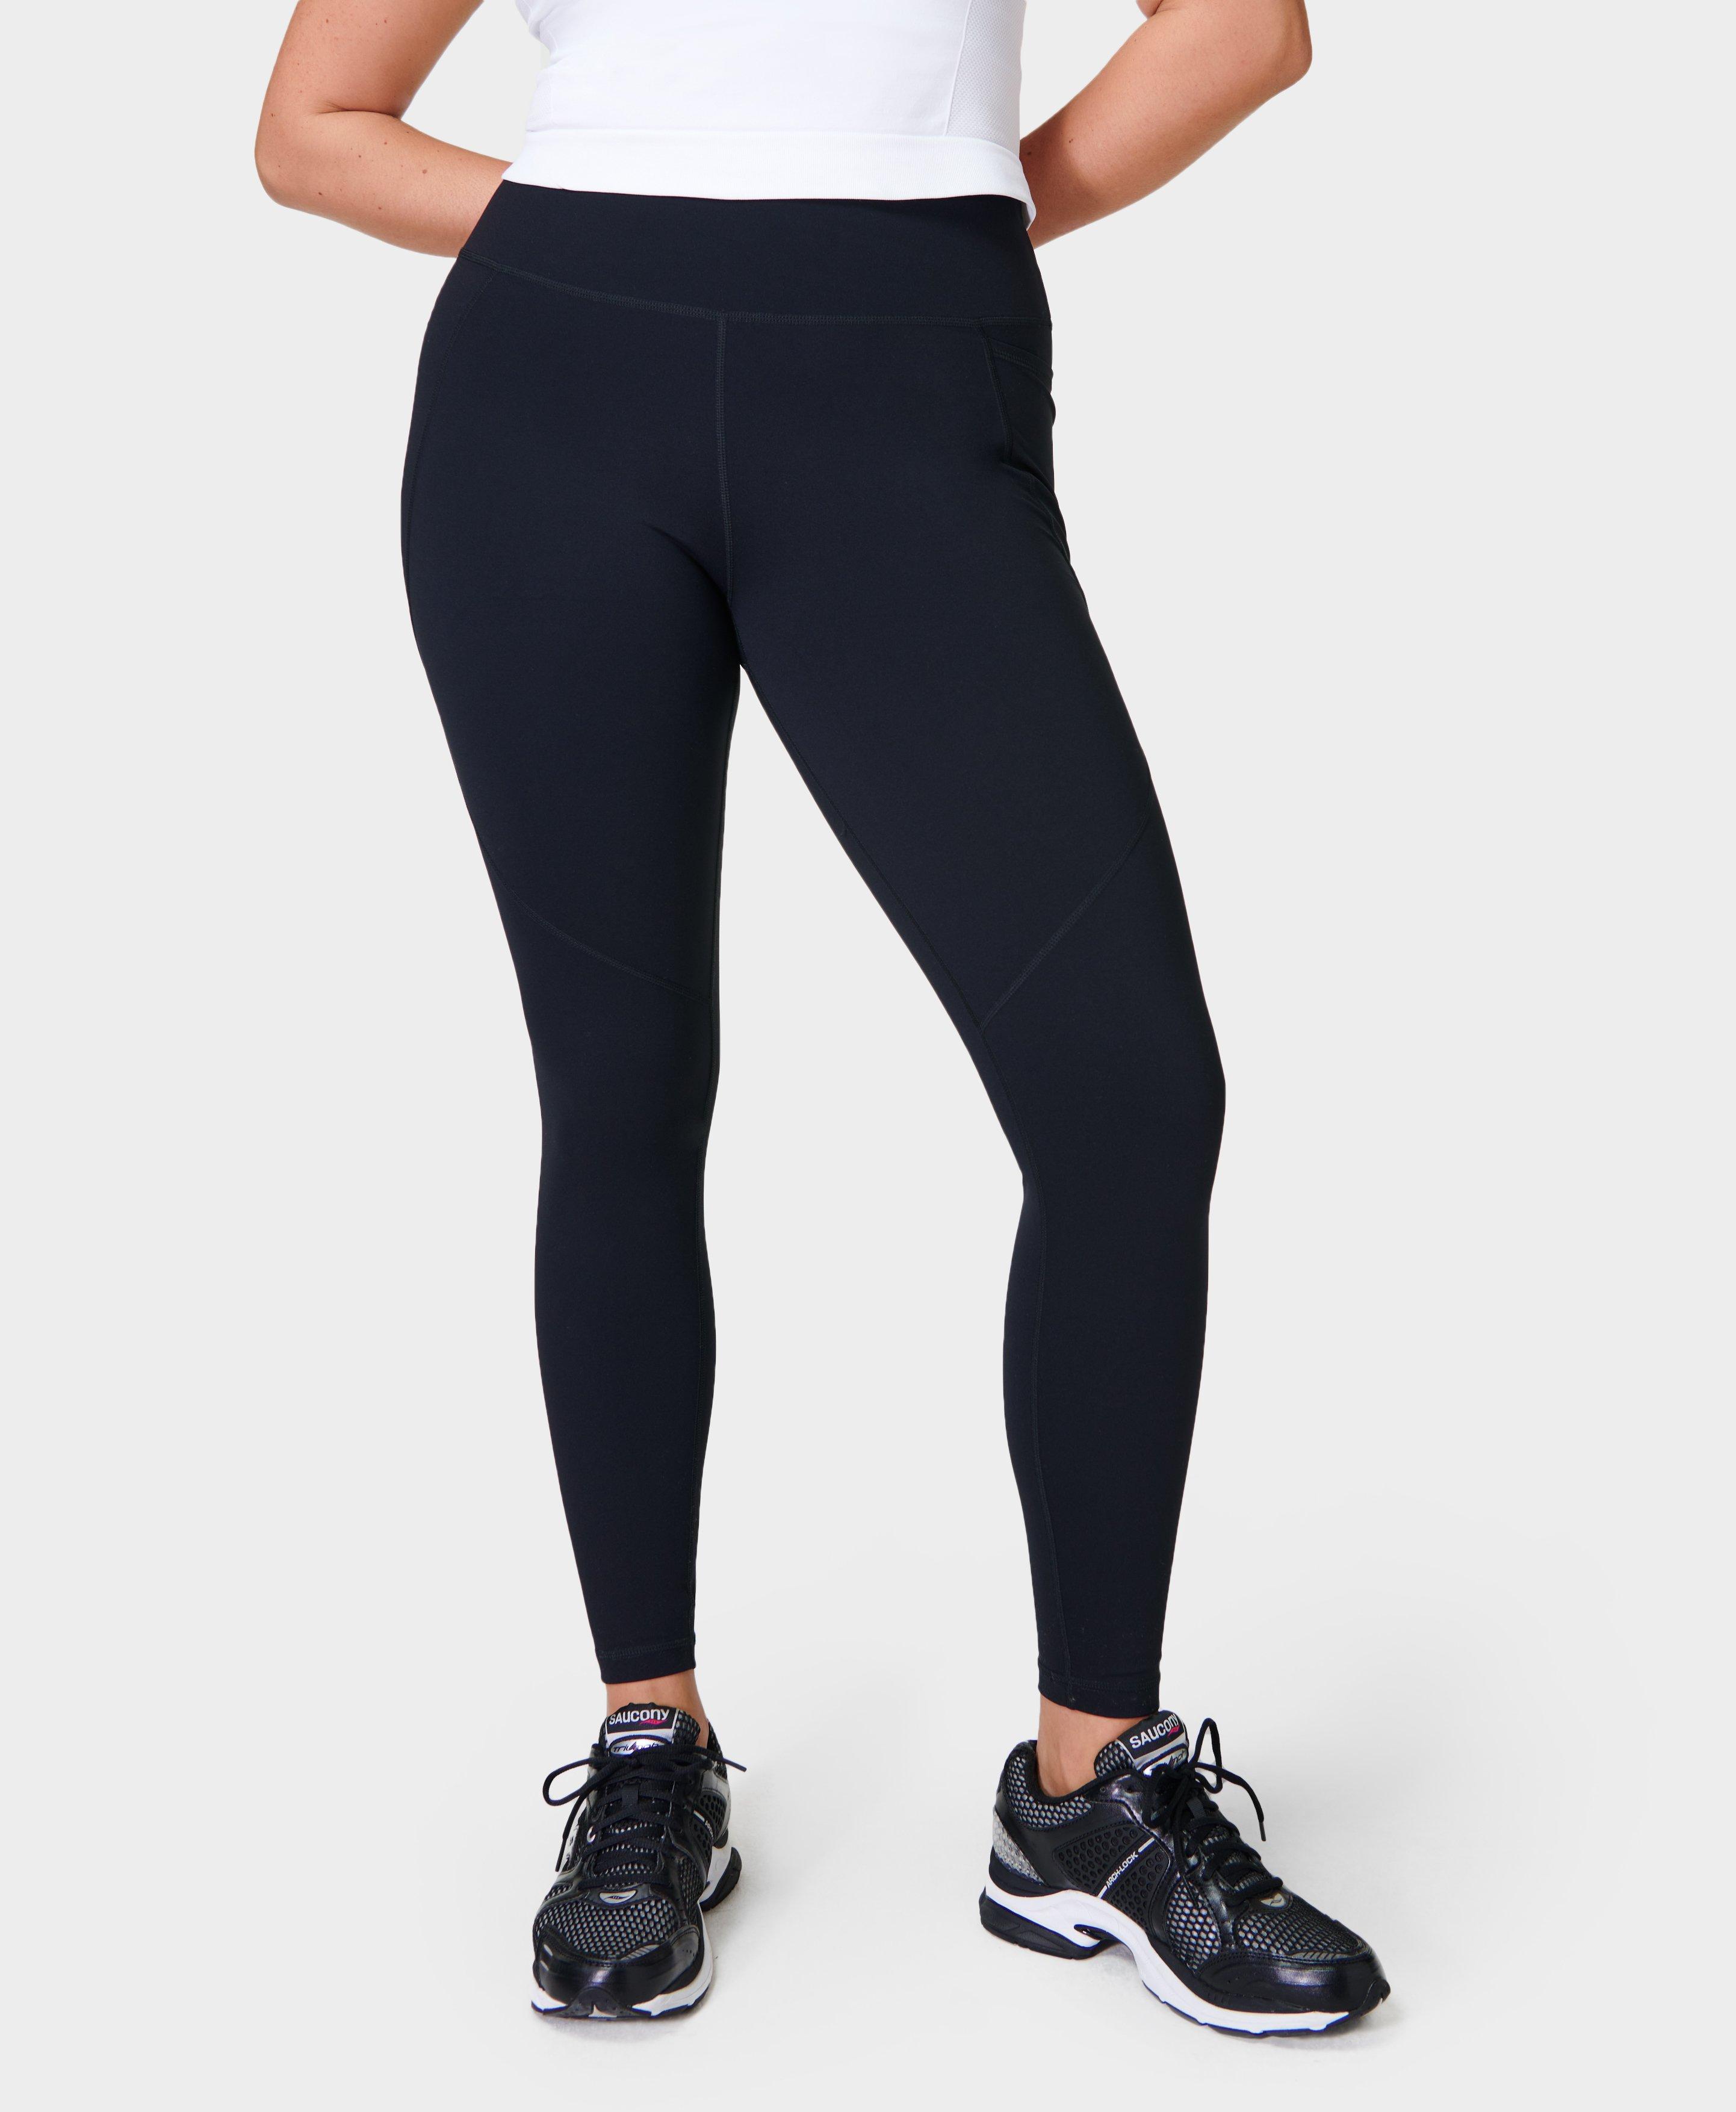 Women's Fitness Leggings BANG! Black & White E-store  -  Polish manufacturer of sportswear for fitness, Crossfit, gym, running.  Quick delivery and easy return and exchange